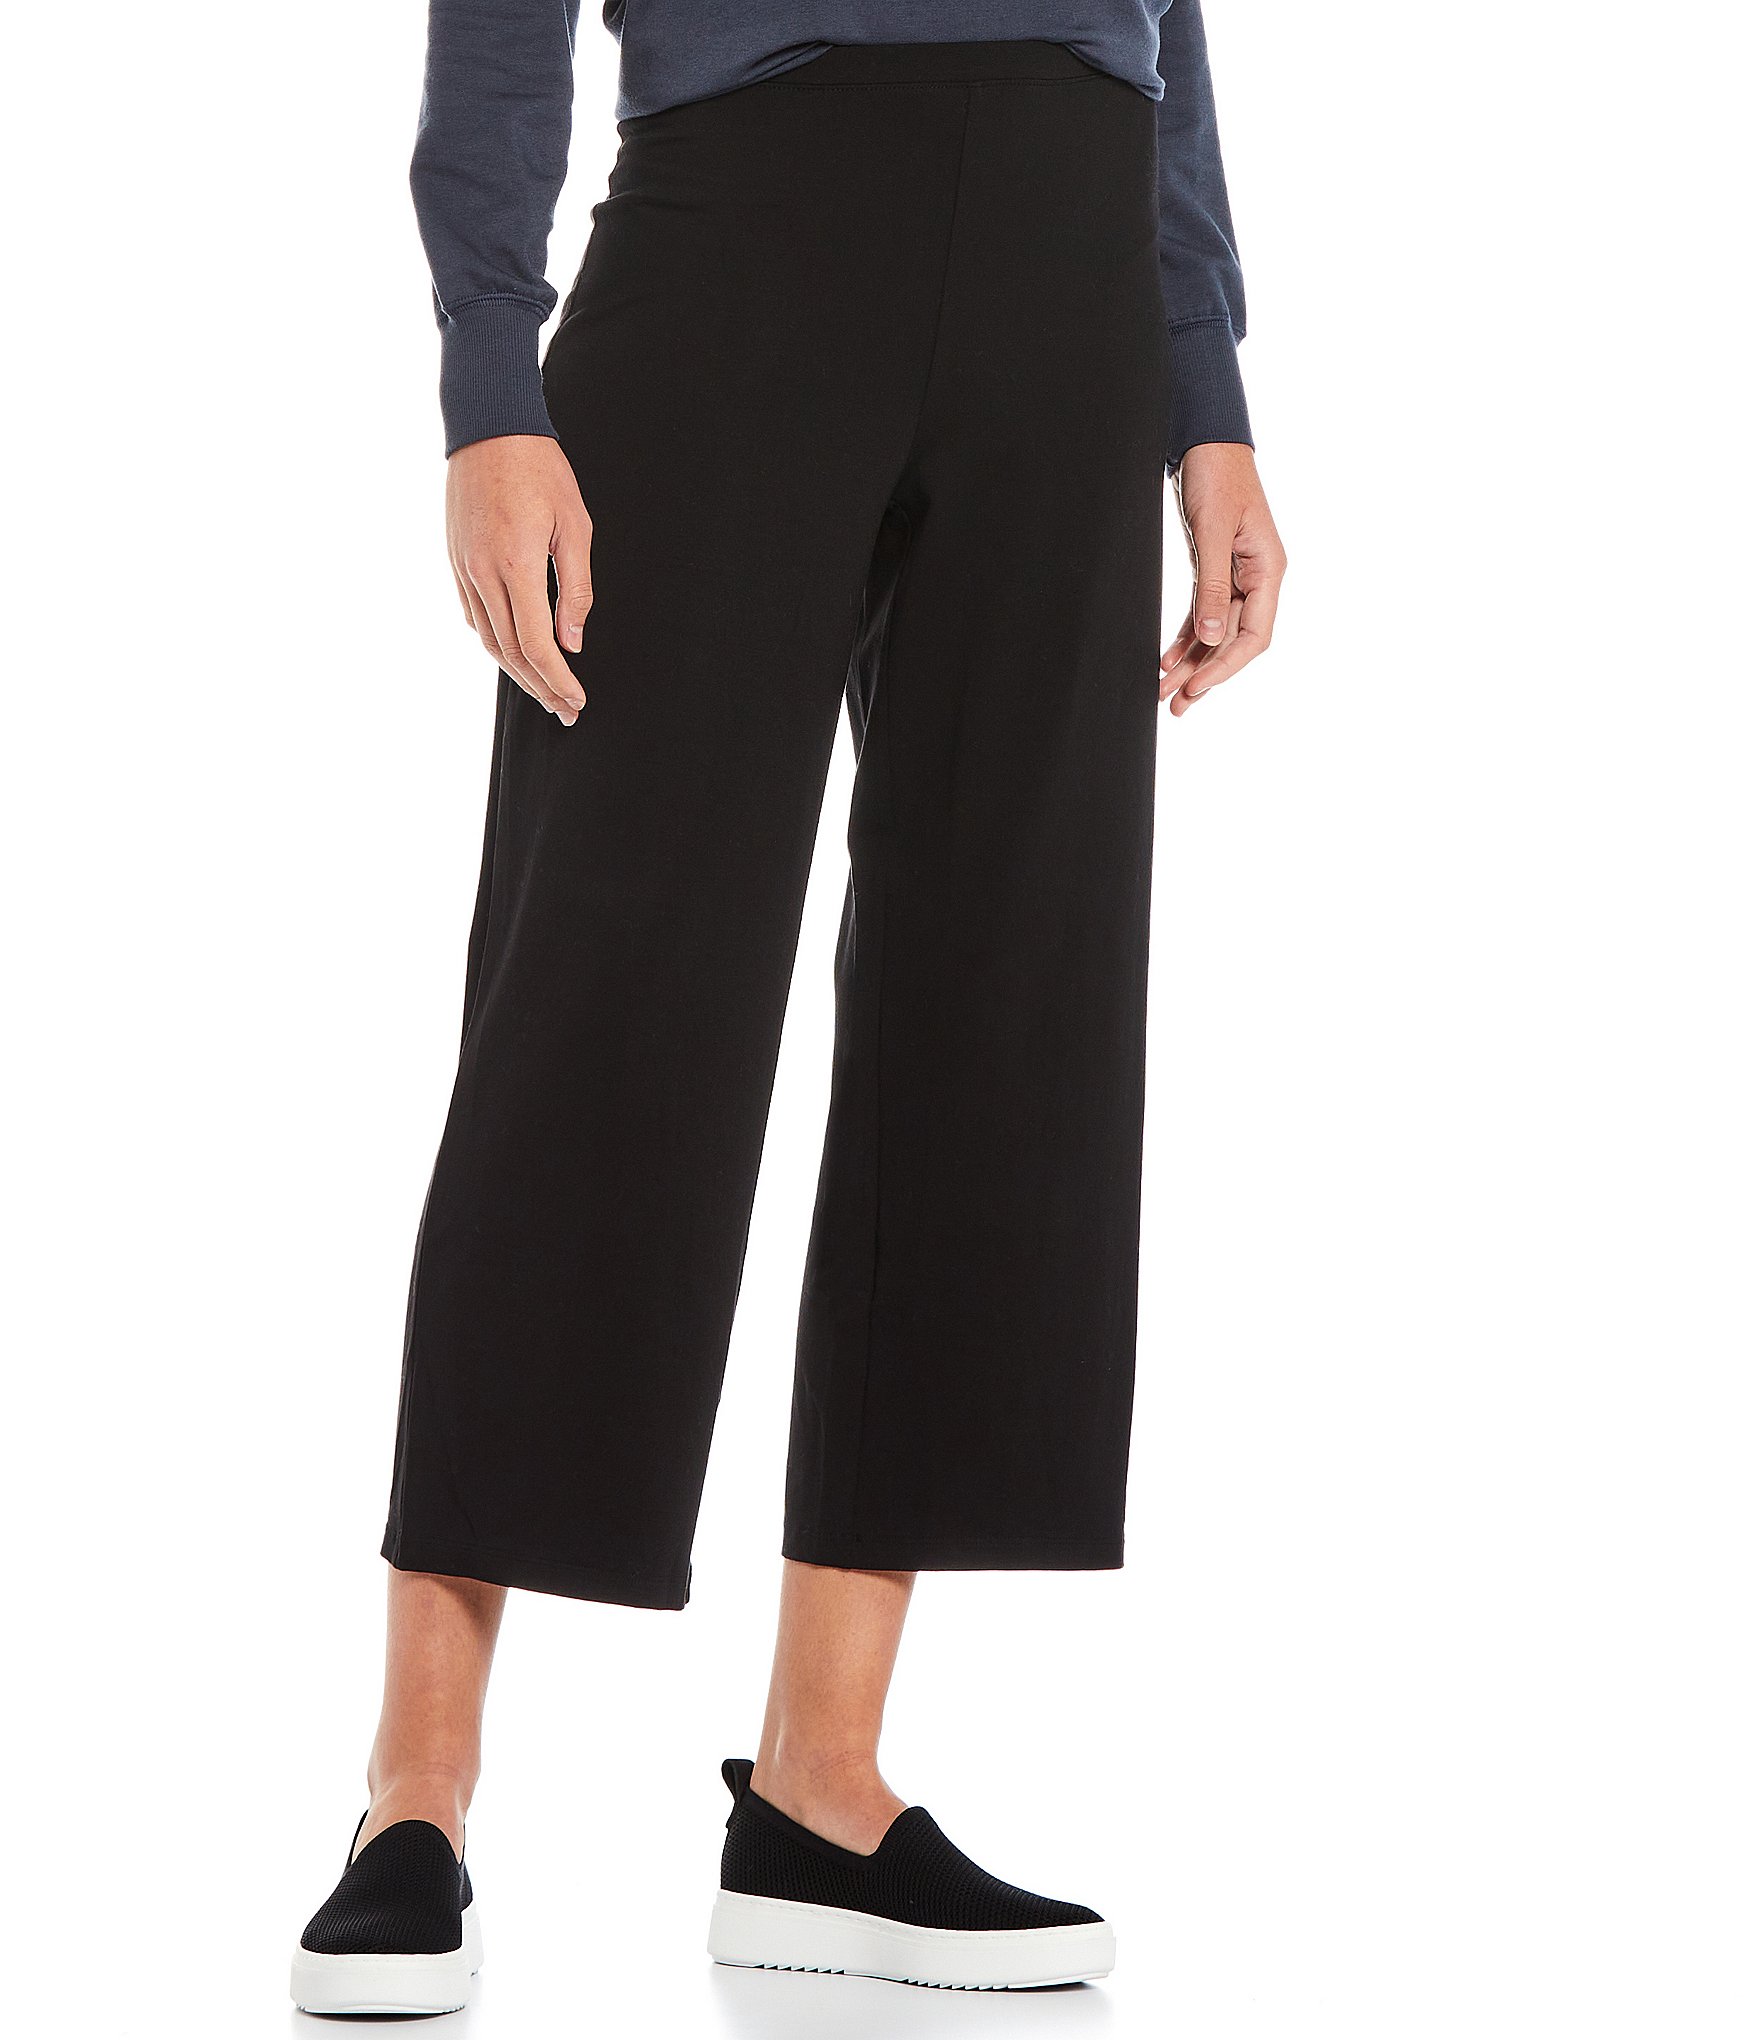 EILEEN FISHER Black Viscose Blend Straight Leg Stretch Travel Pants Size S  Small